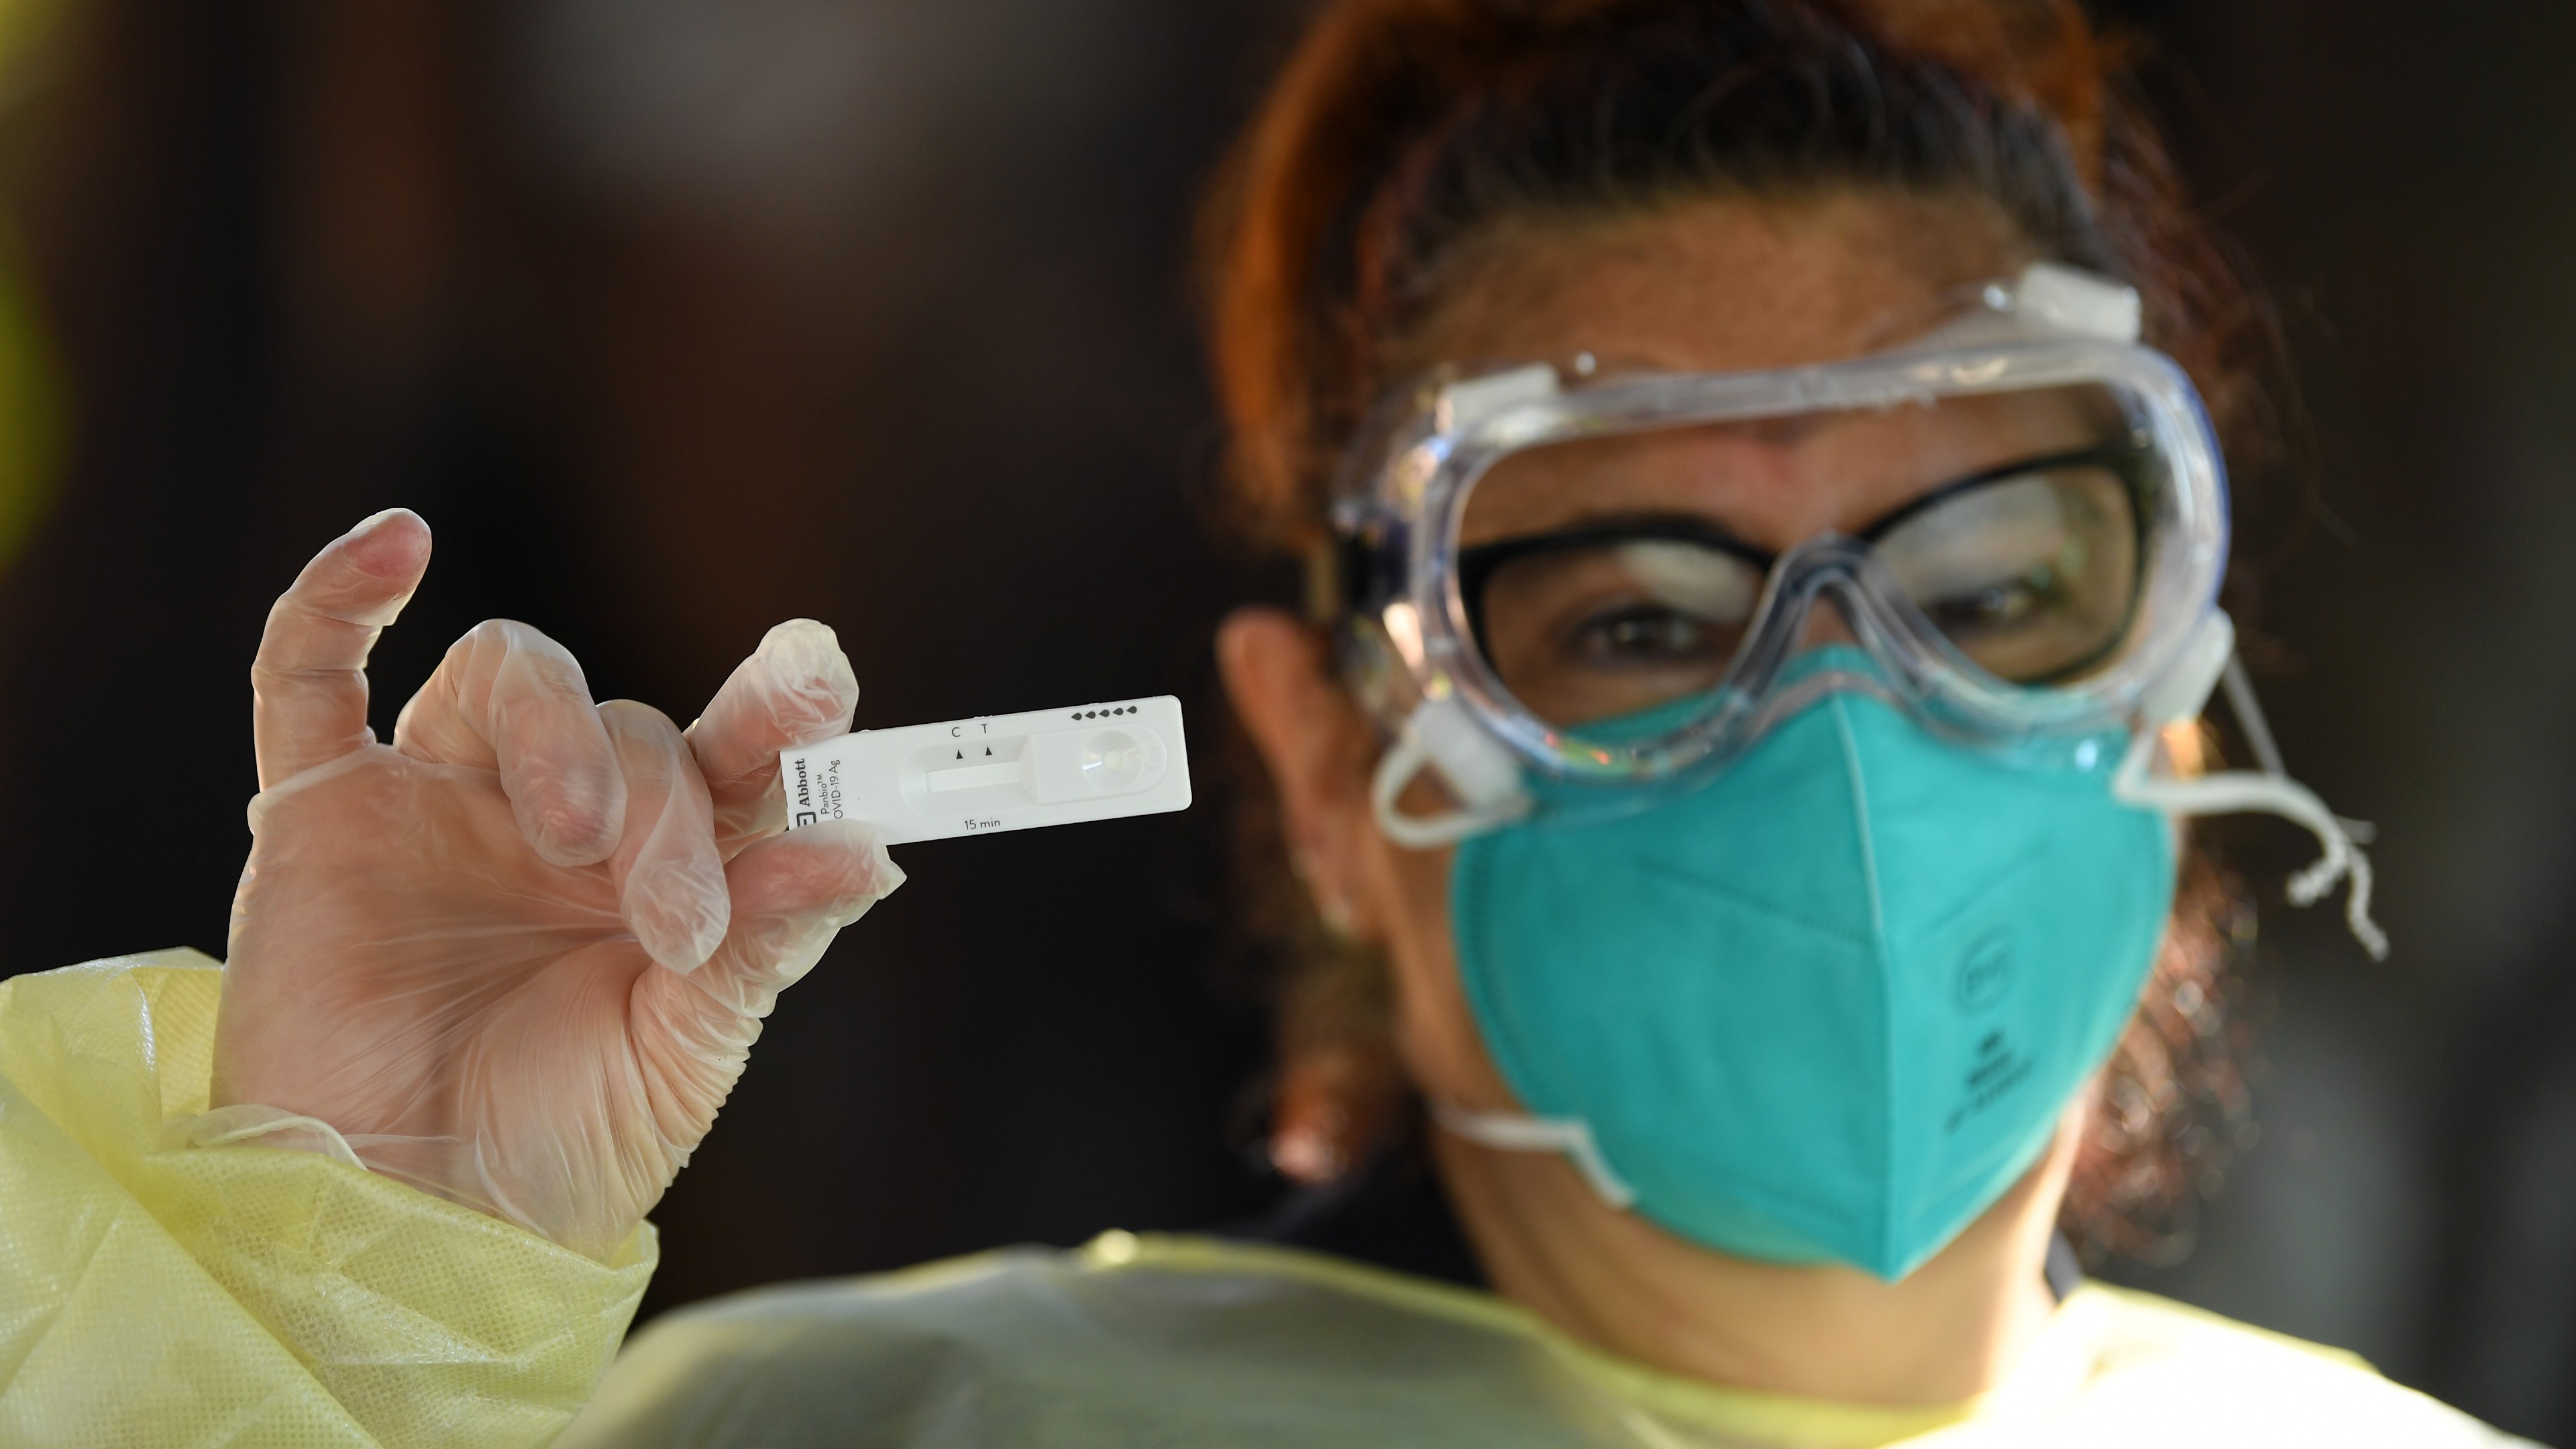 A healthcare worker holds up a COVID-19 rapid antigen test.